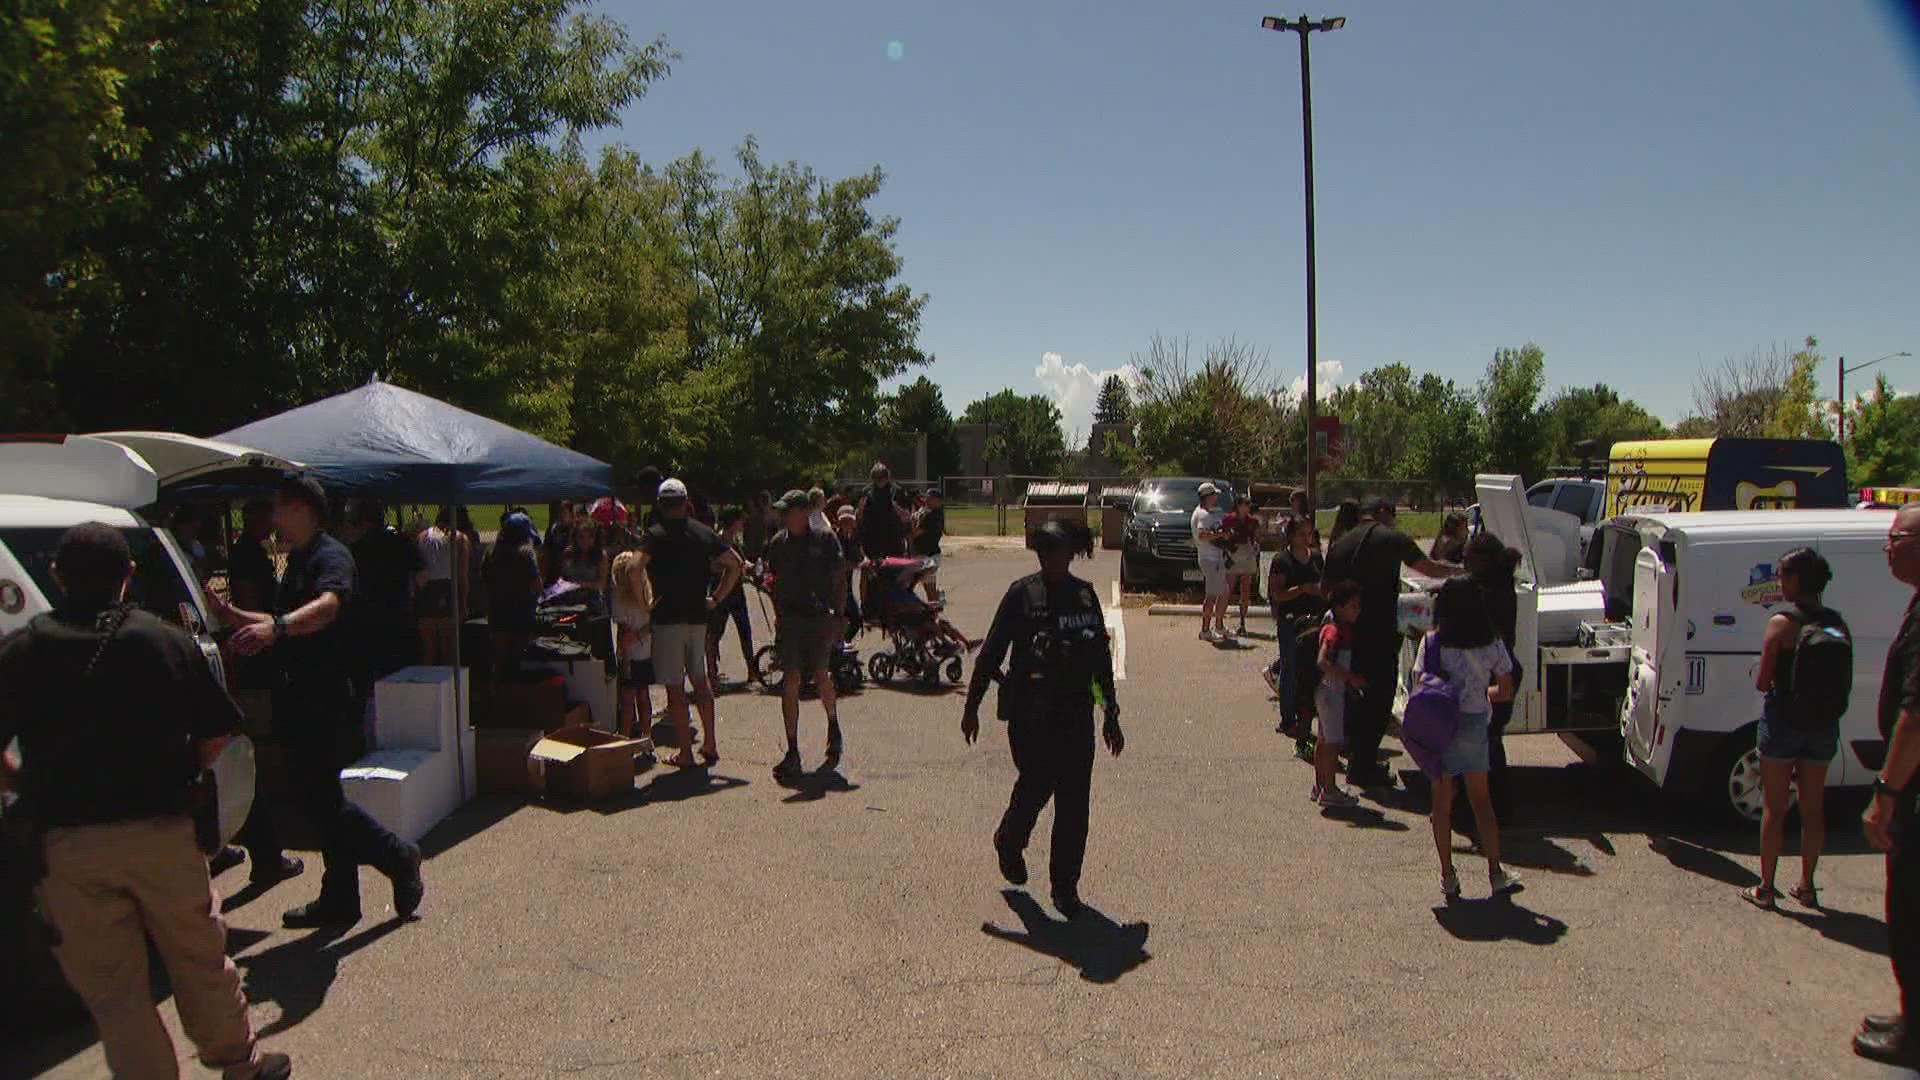 The yearly Back to School Caravan took place Saturday morning.